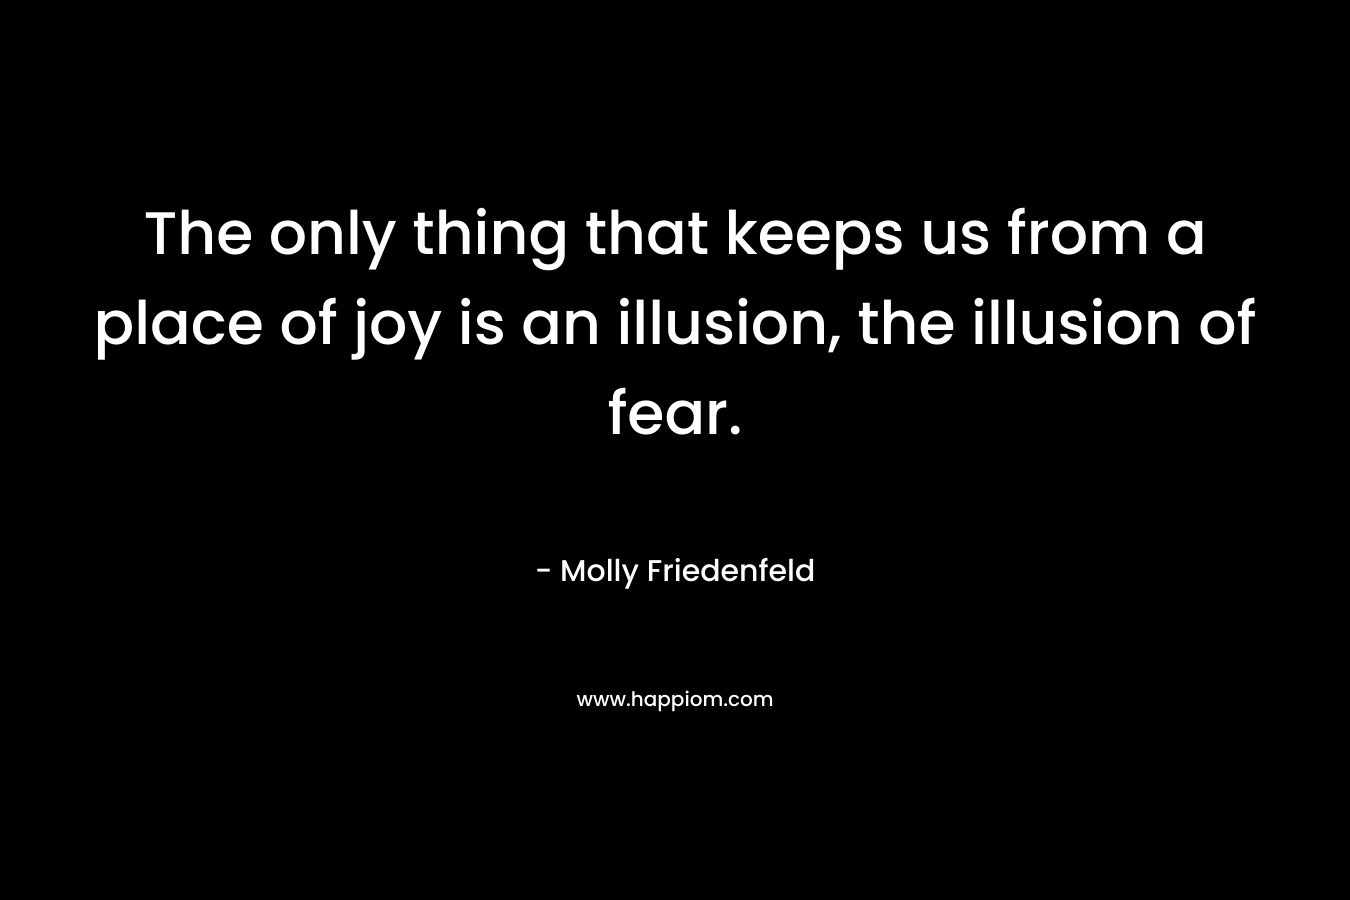 The only thing that keeps us from a place of joy is an illusion, the illusion of fear. – Molly Friedenfeld